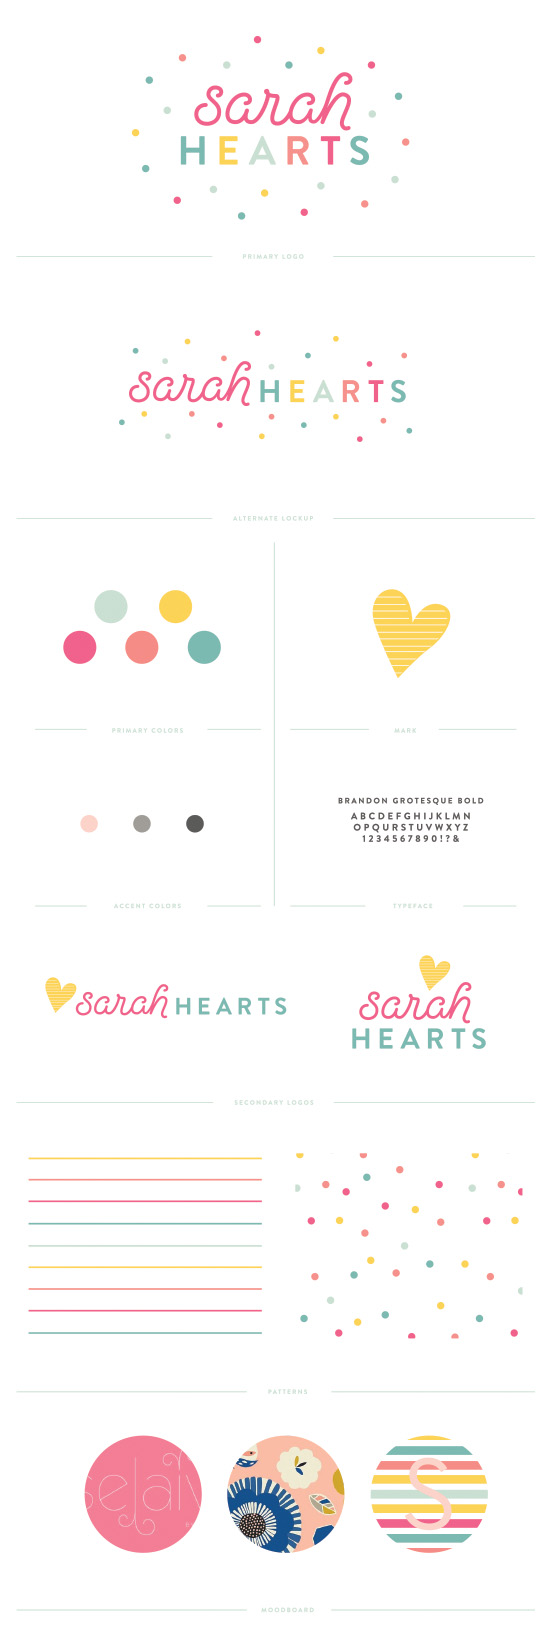 Sarah Hearts branding by Pinegate Road